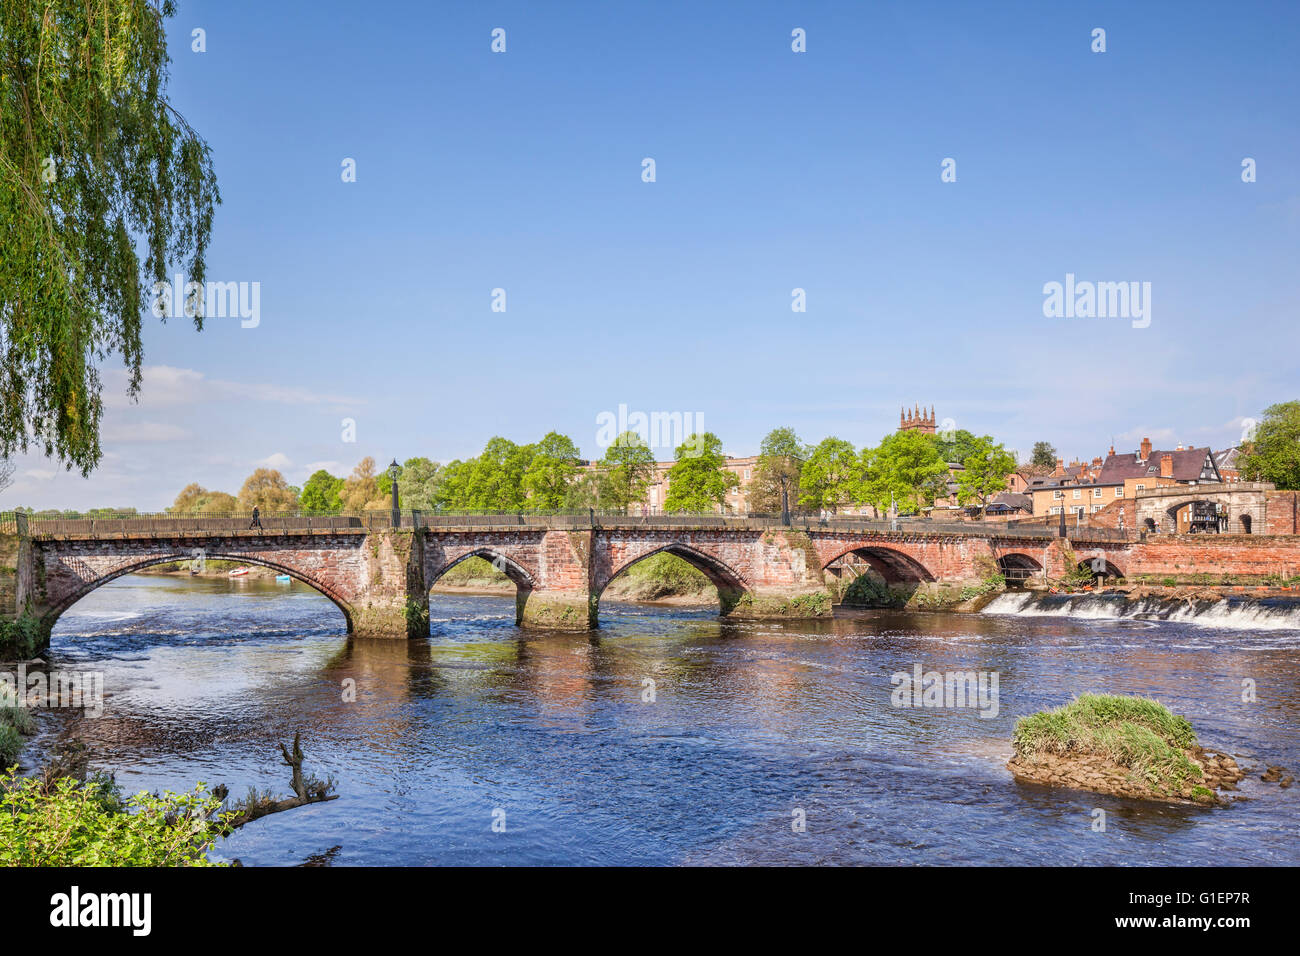 The Old Dee Bridge and the River Dee, Chester, Cheshire, England, UK Stock Photo